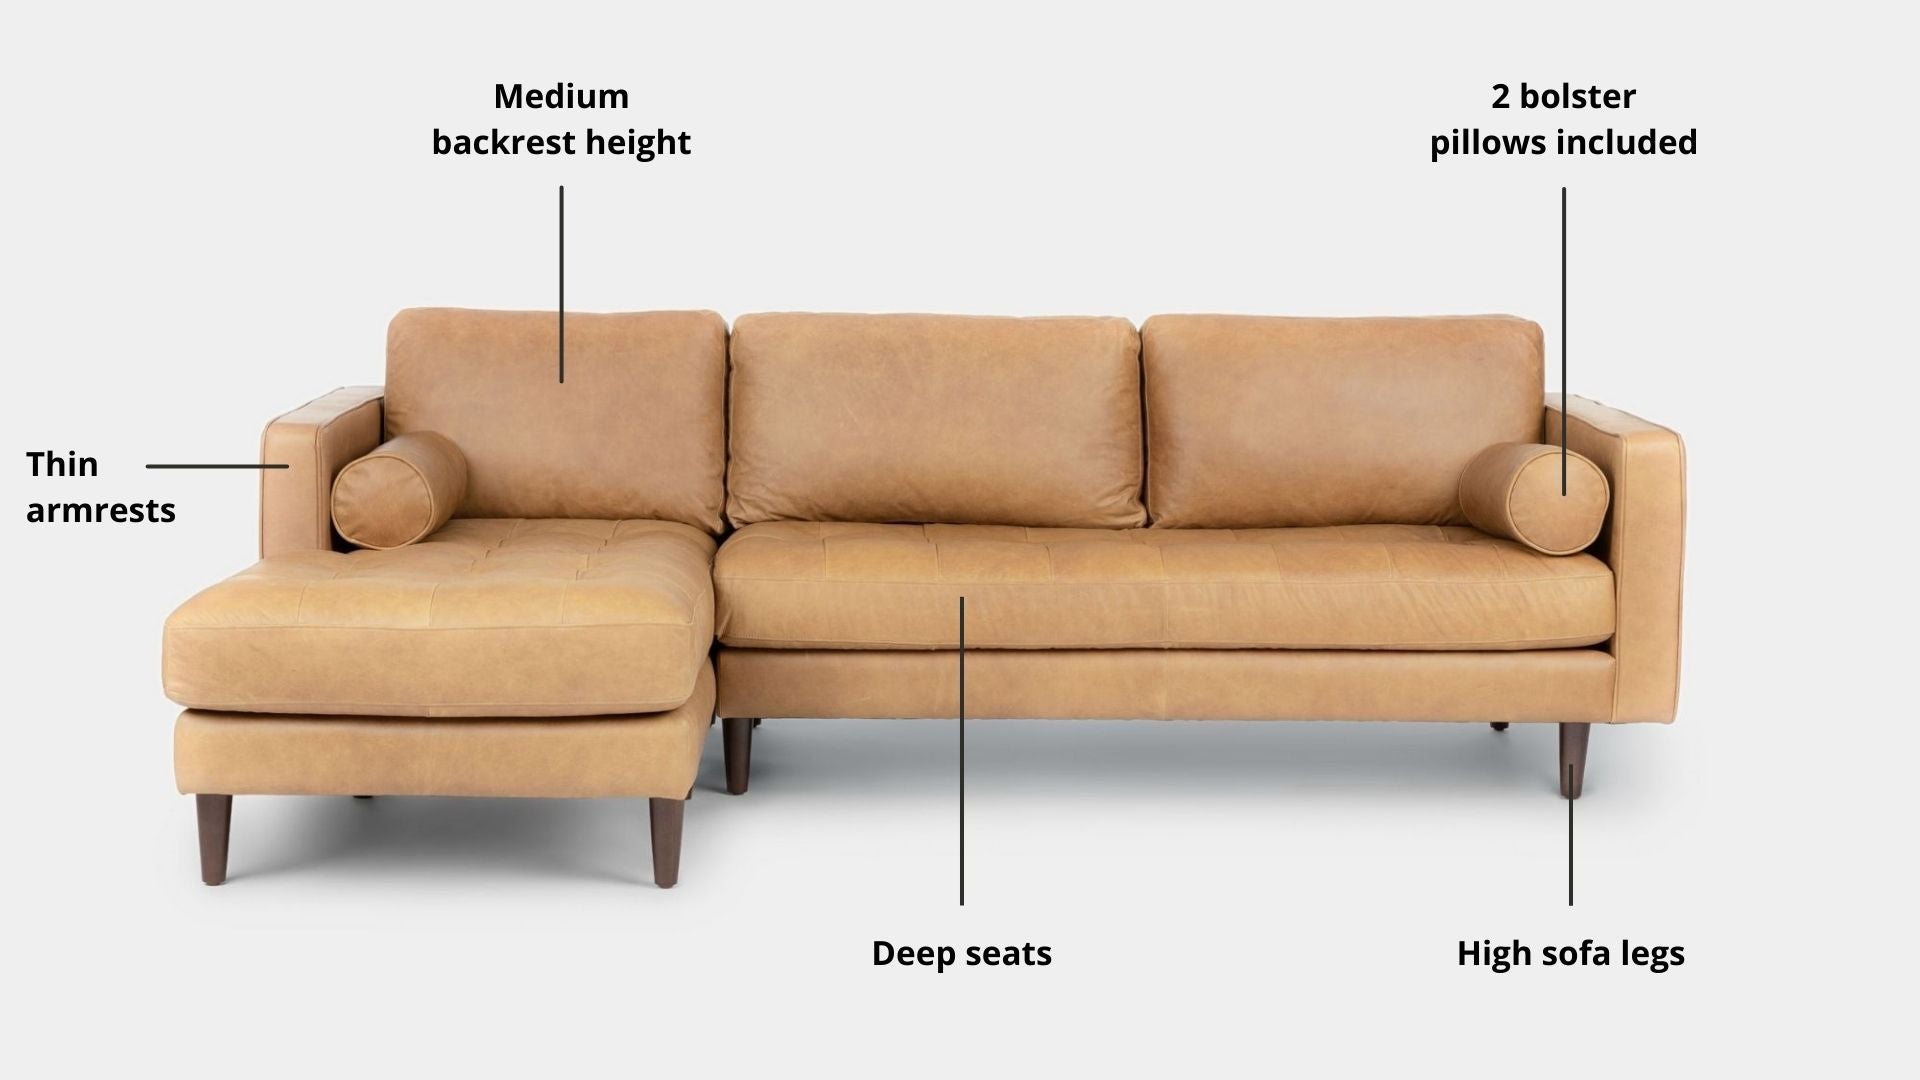 Key features such as armrest thickness, cushion height, seat depth and sofa leg height for Castle Half Leather Sectional Sofa